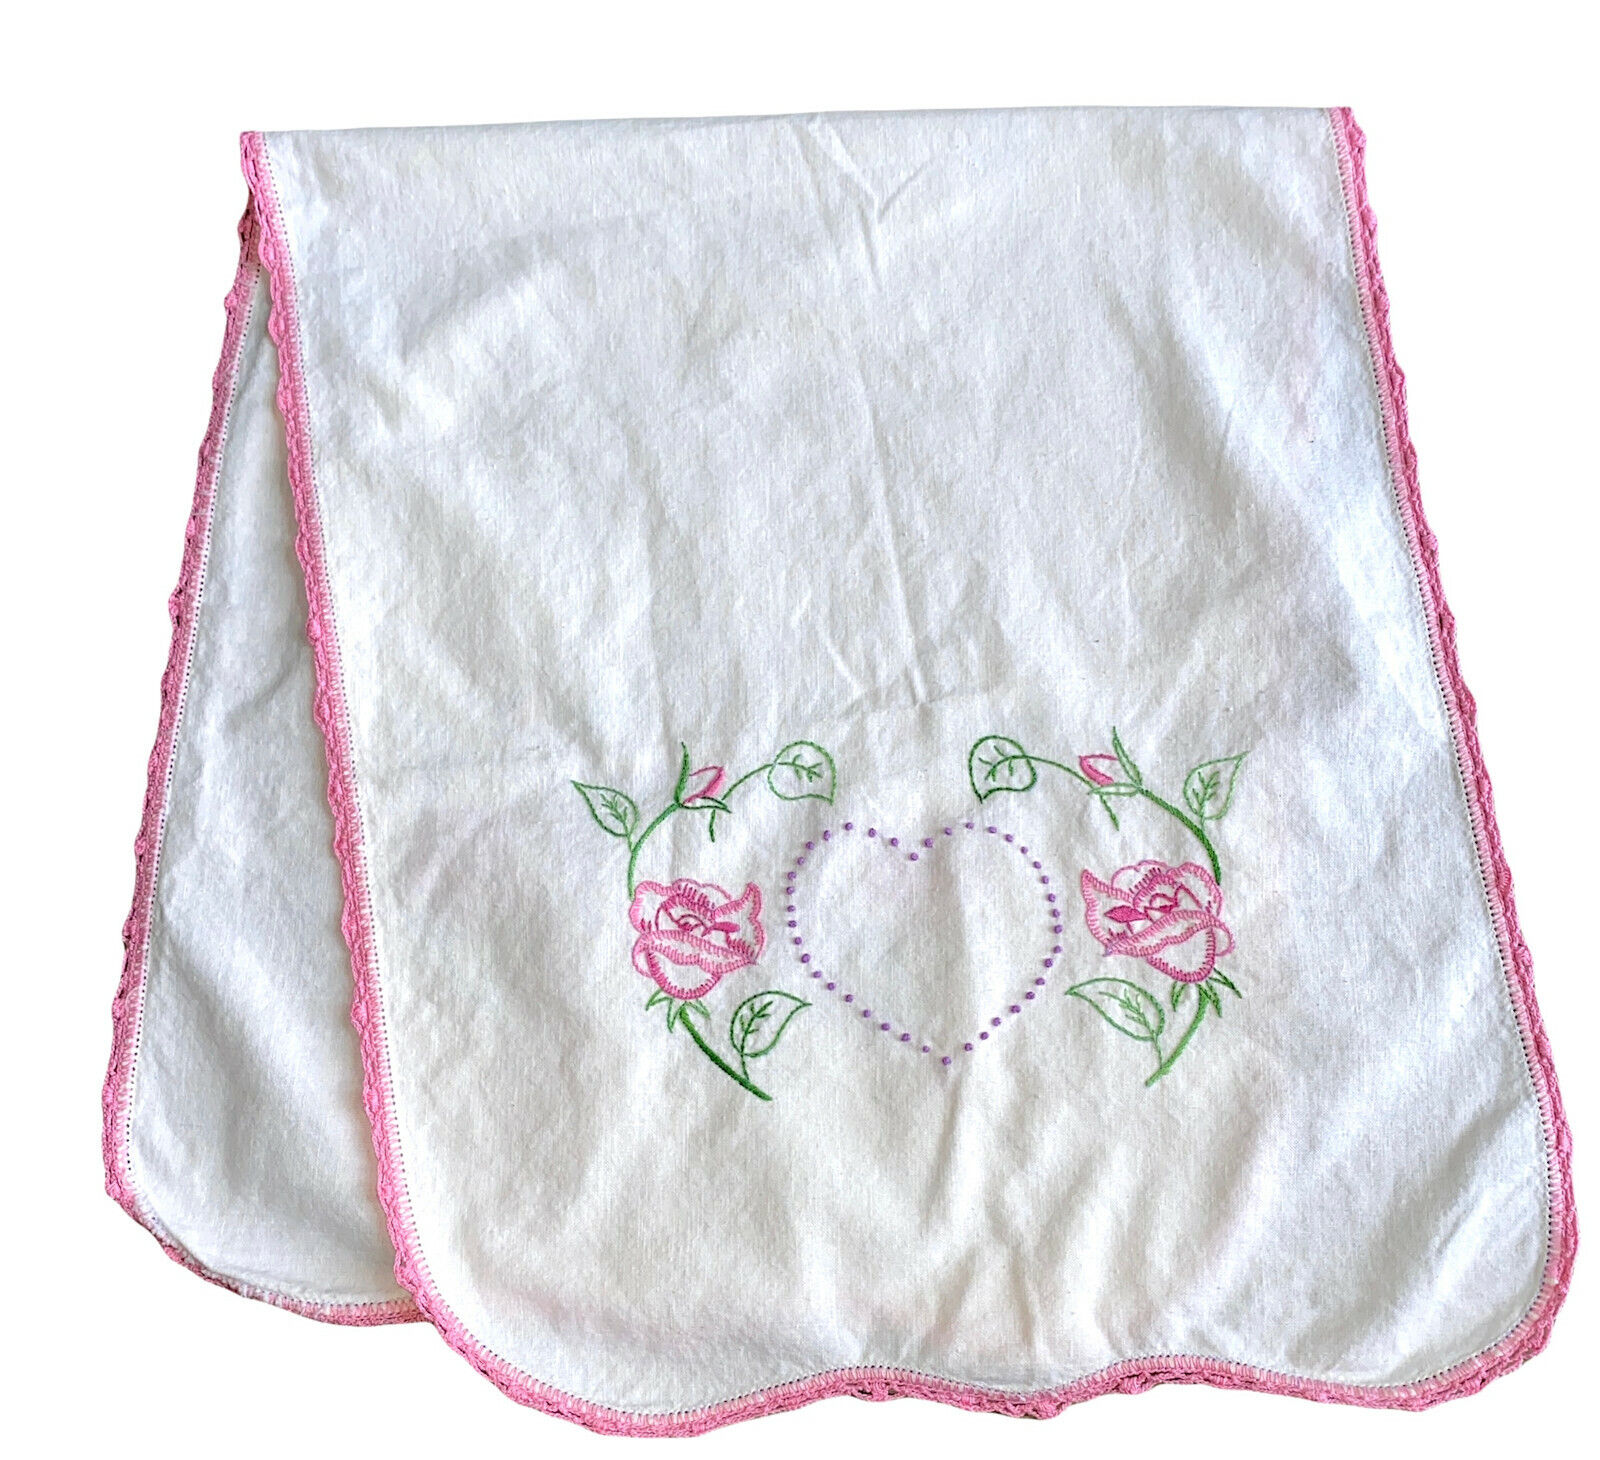 Vintage Heart Rose Embroidered Table Runner Crochet Lace Doily Valentine